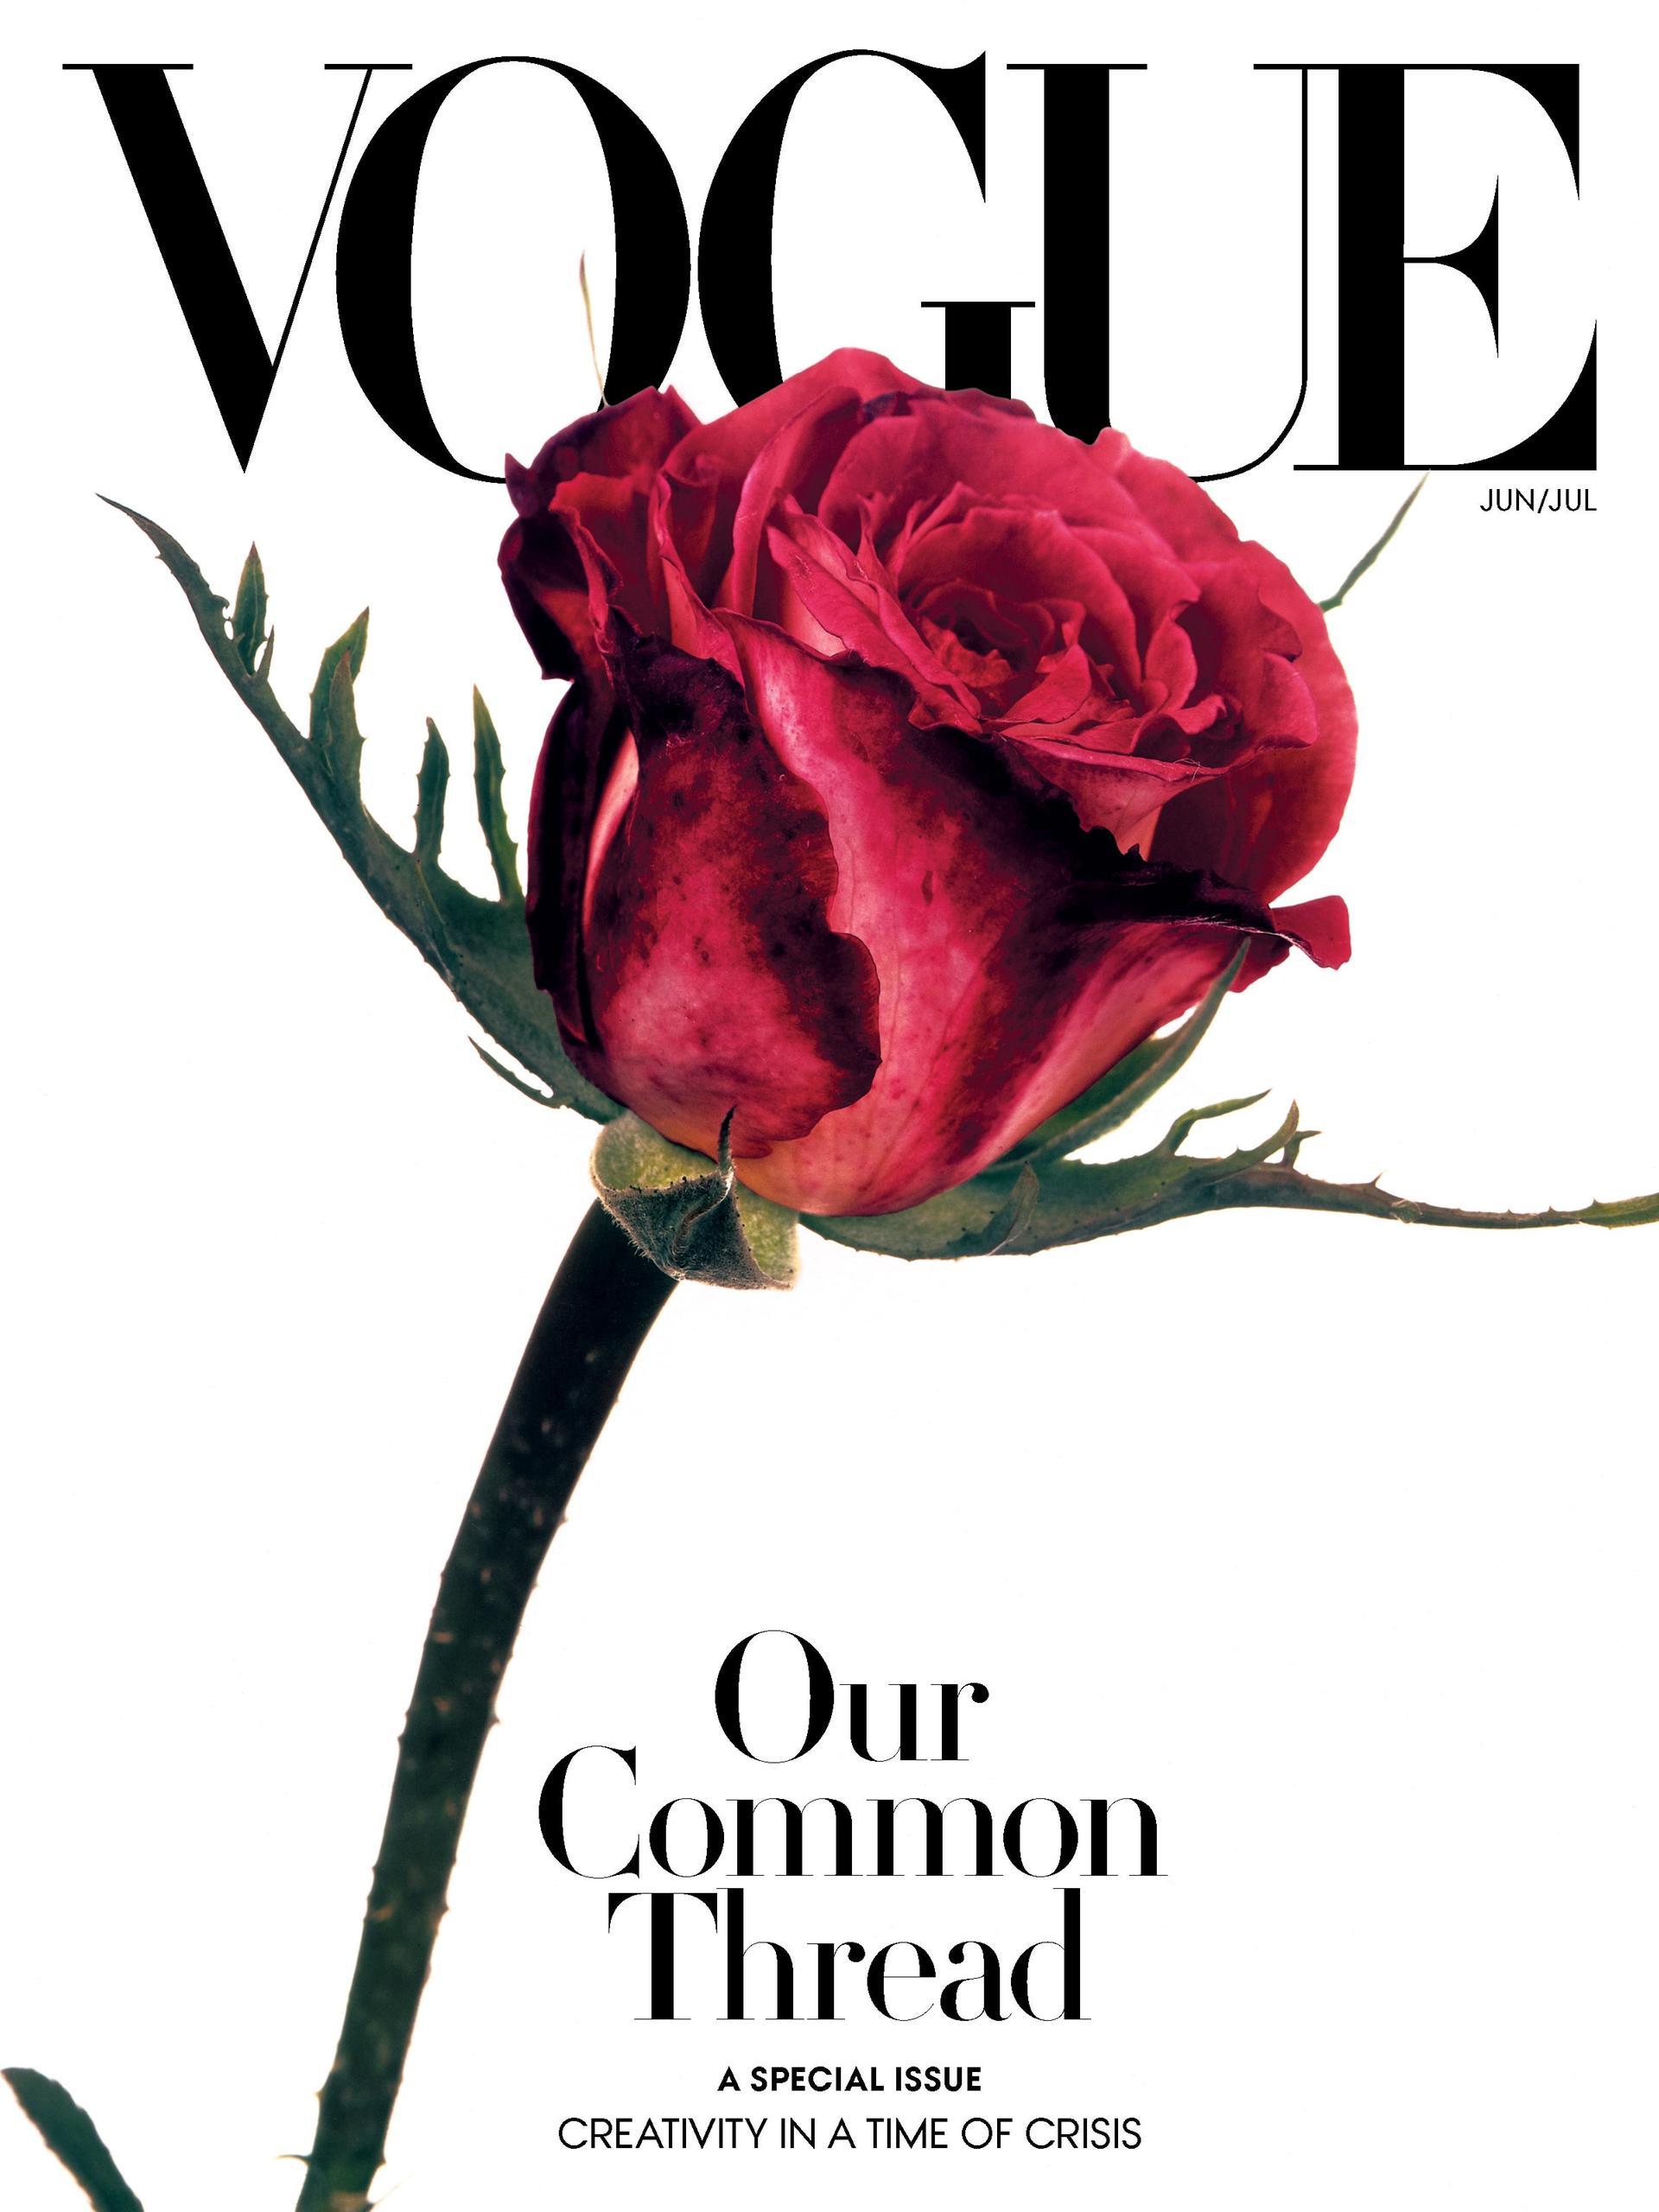 How the Fashion Magazine Cover went Activist - Fashion Unfiltered